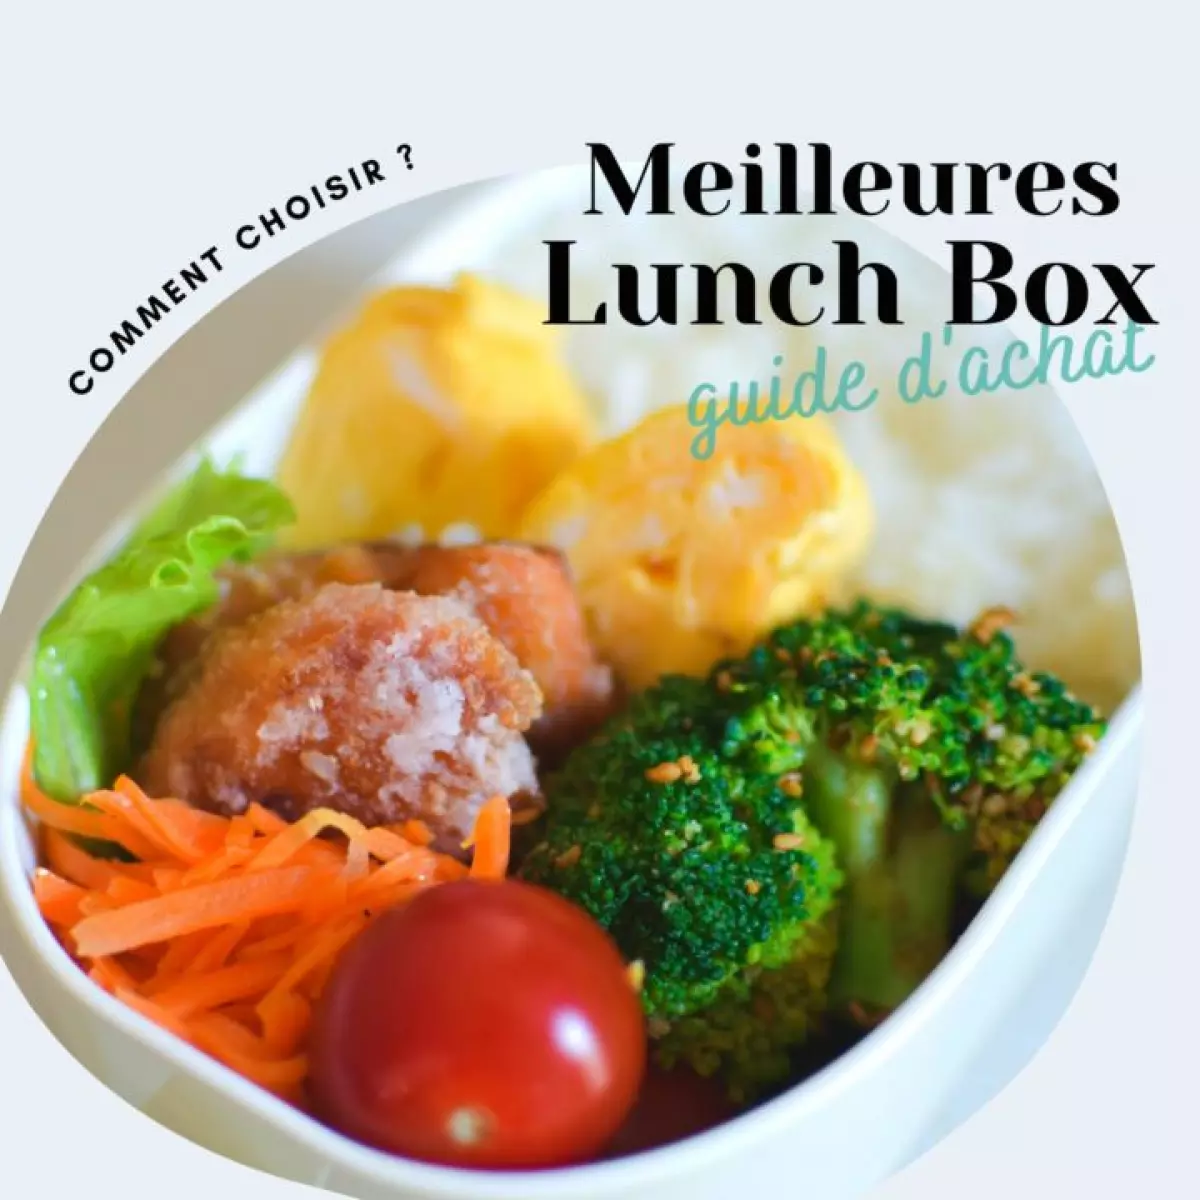 Meilleures lunch box